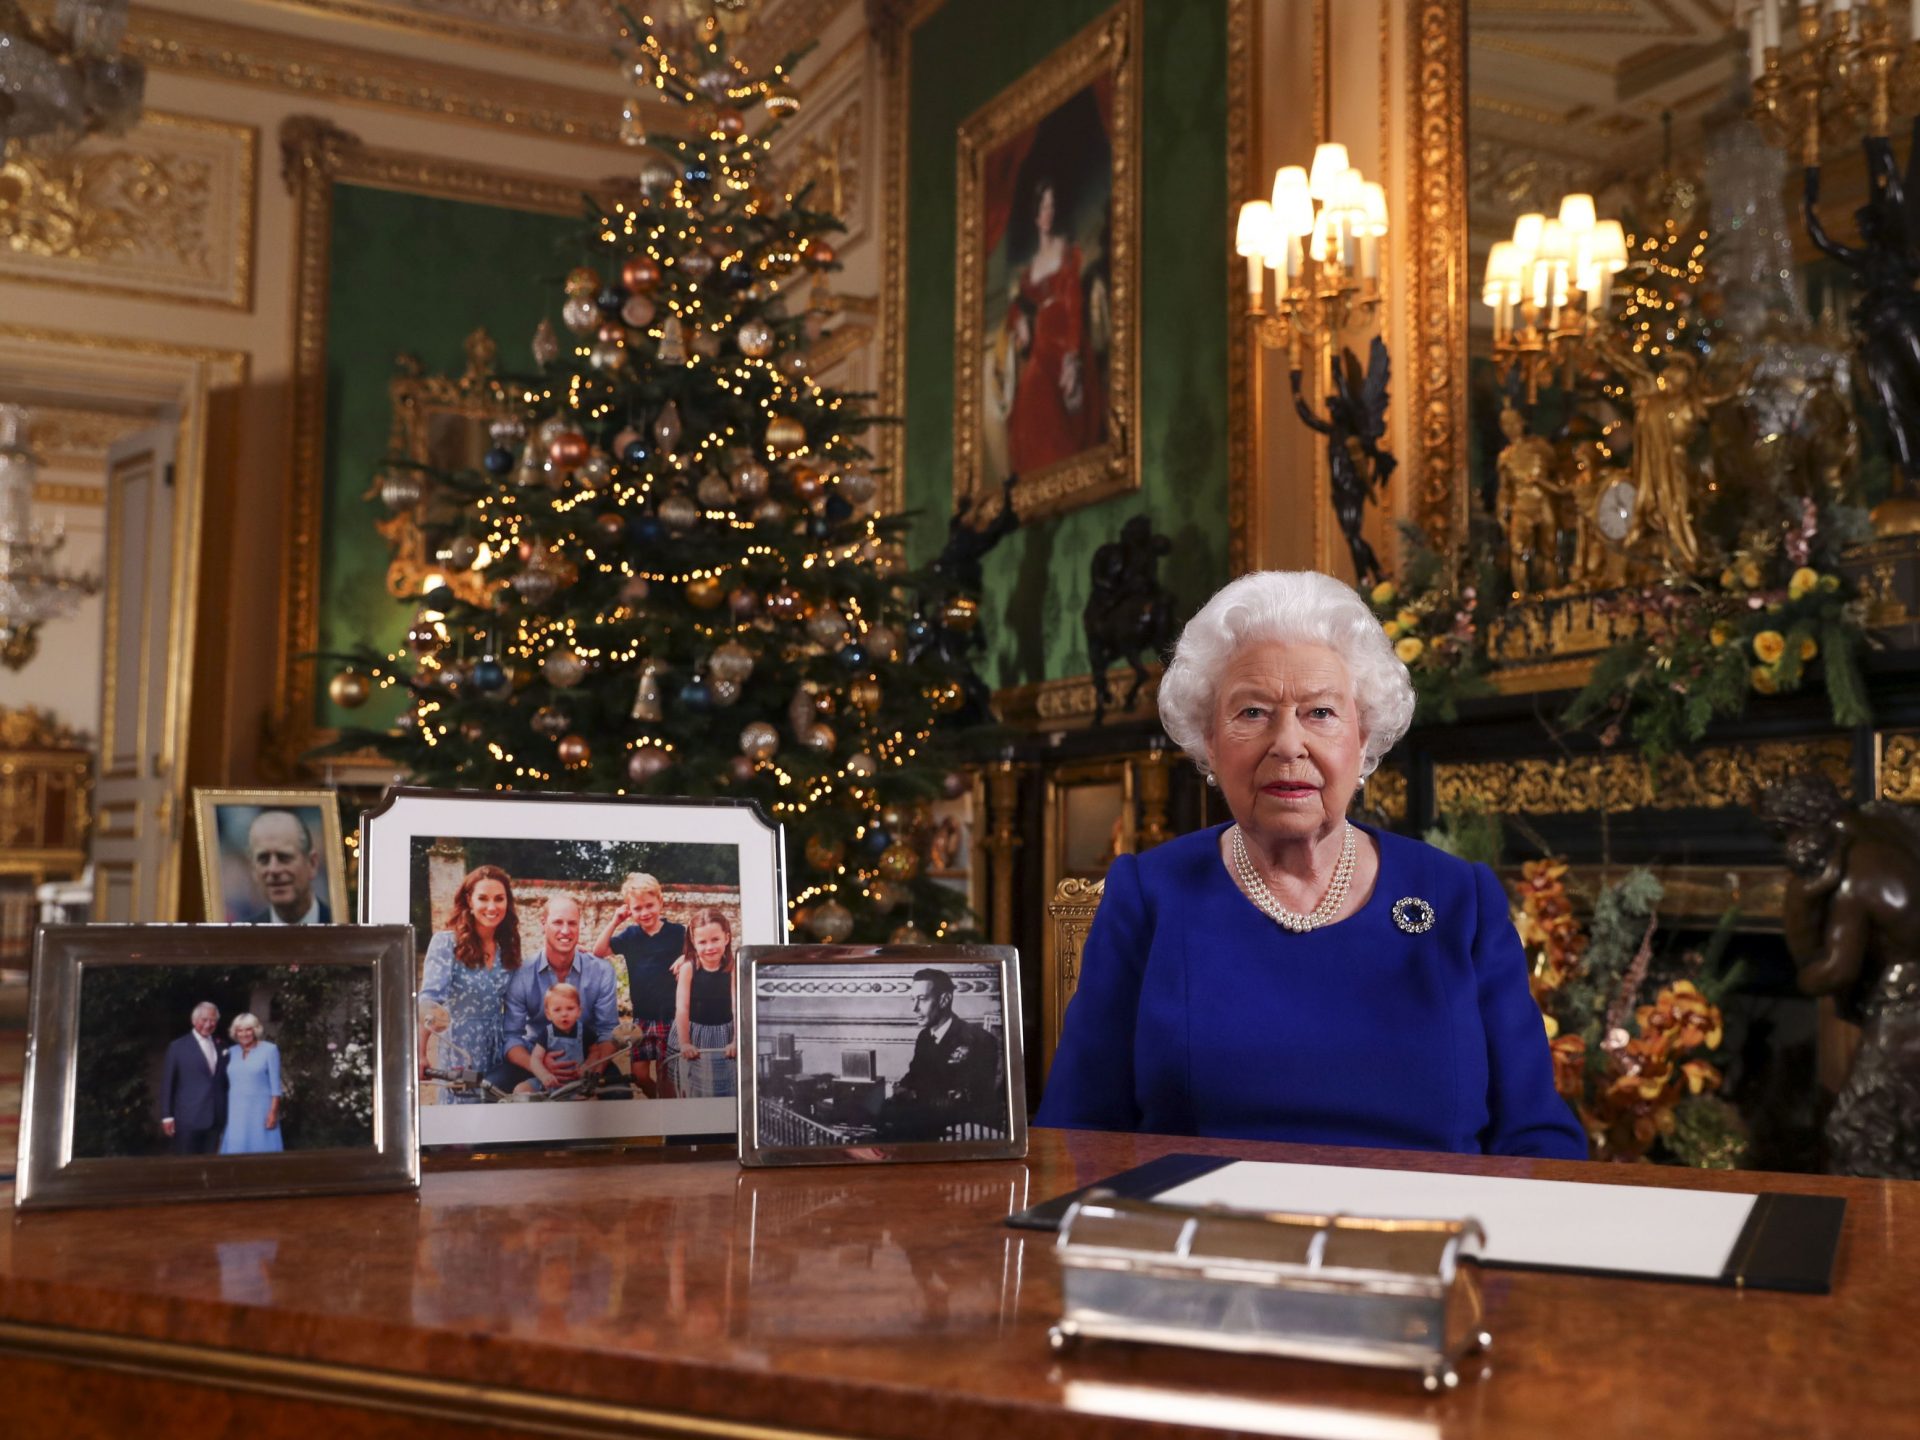 Queen Elizabeth II posed for a photograph after she recorded her annual Christmas Day message last month. Royal watchers noticed the absence of a photo of Harry and Meghan amid the other family photos displayed.